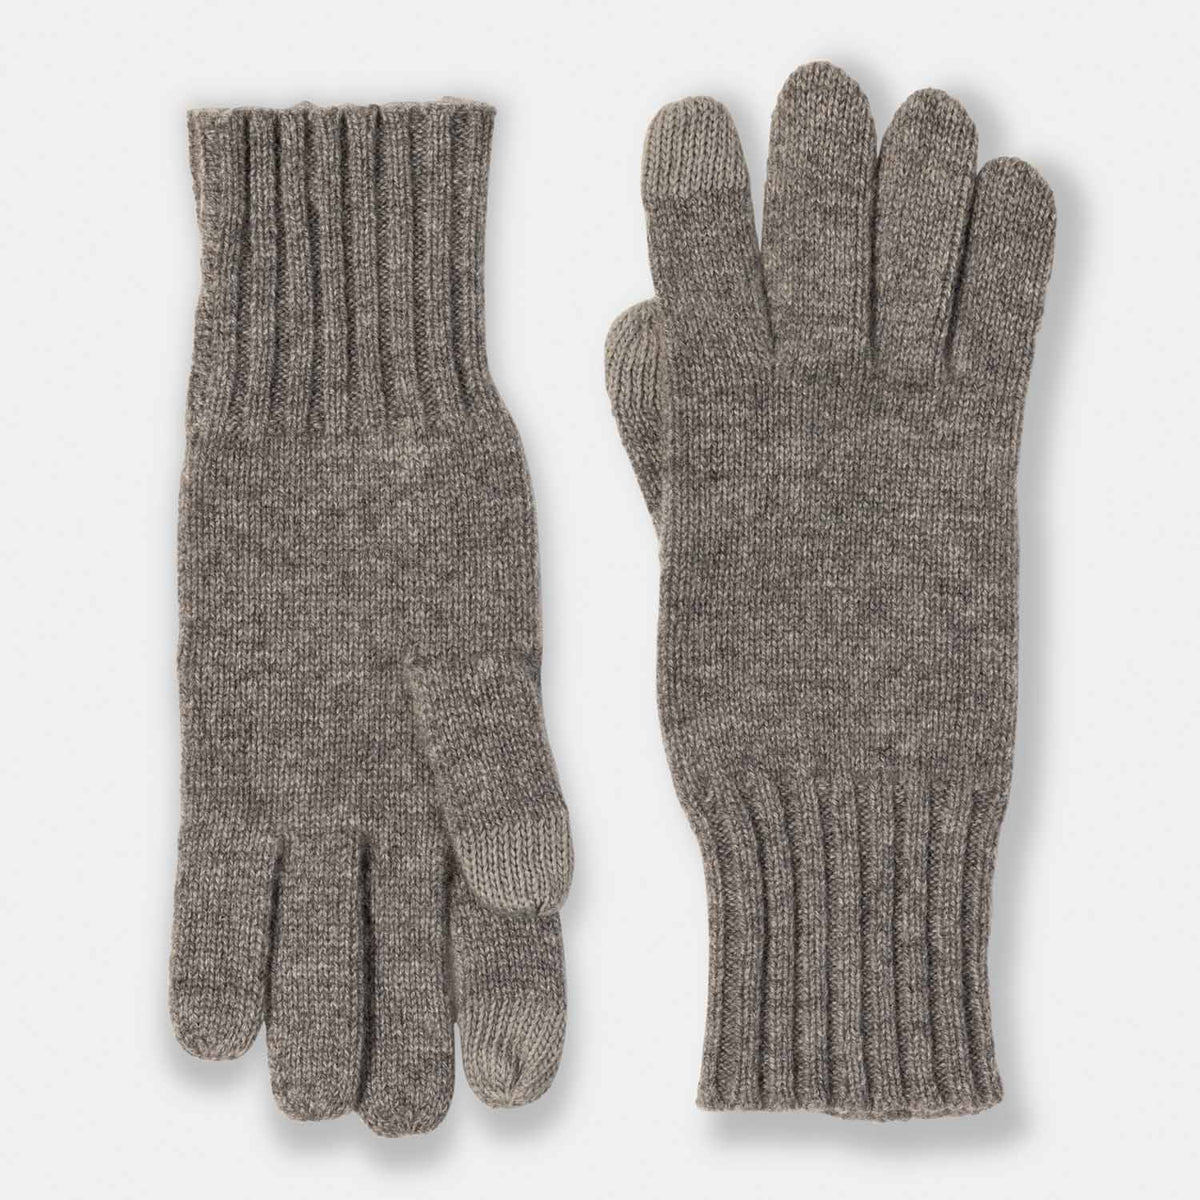 Picture of knit cashmere gloves with touch tech finger tips and rib cuff, grey.